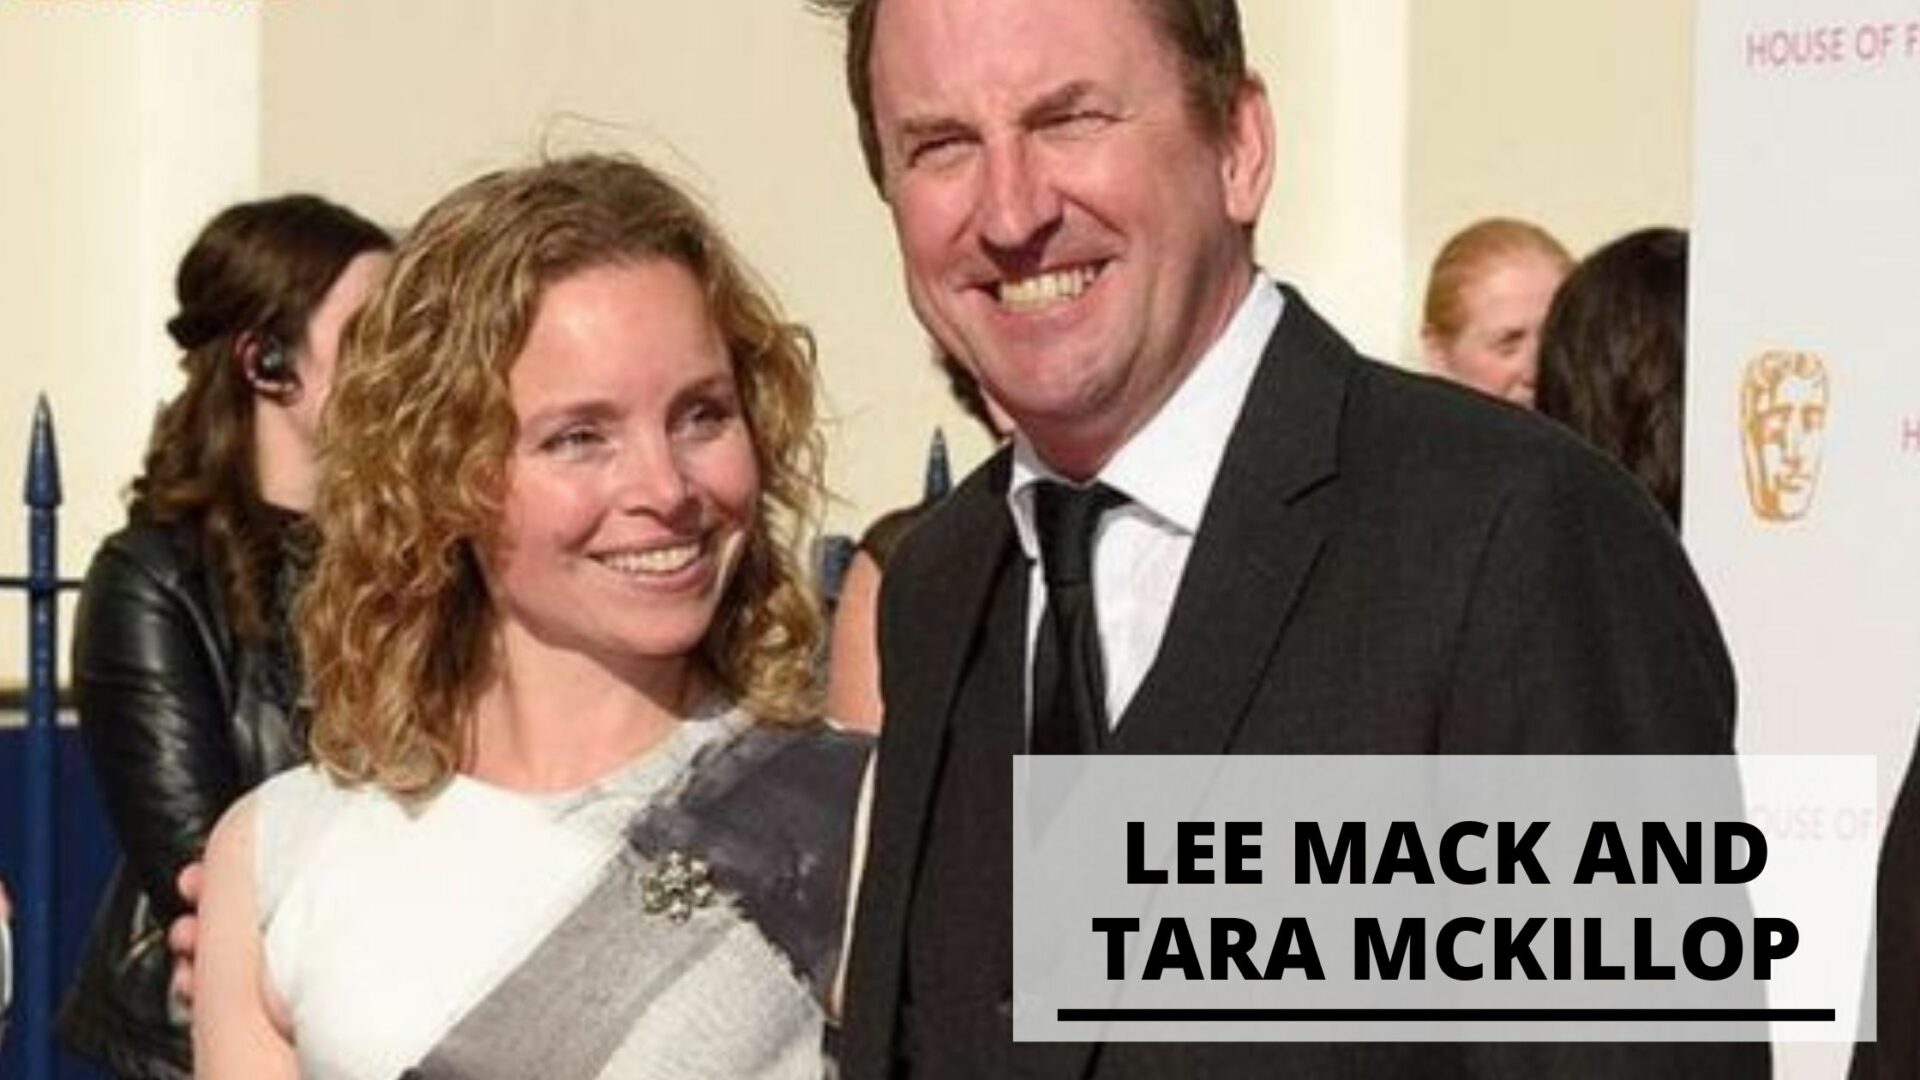 You are currently viewing Rare Pics of Lee Mack and Tara McKillop